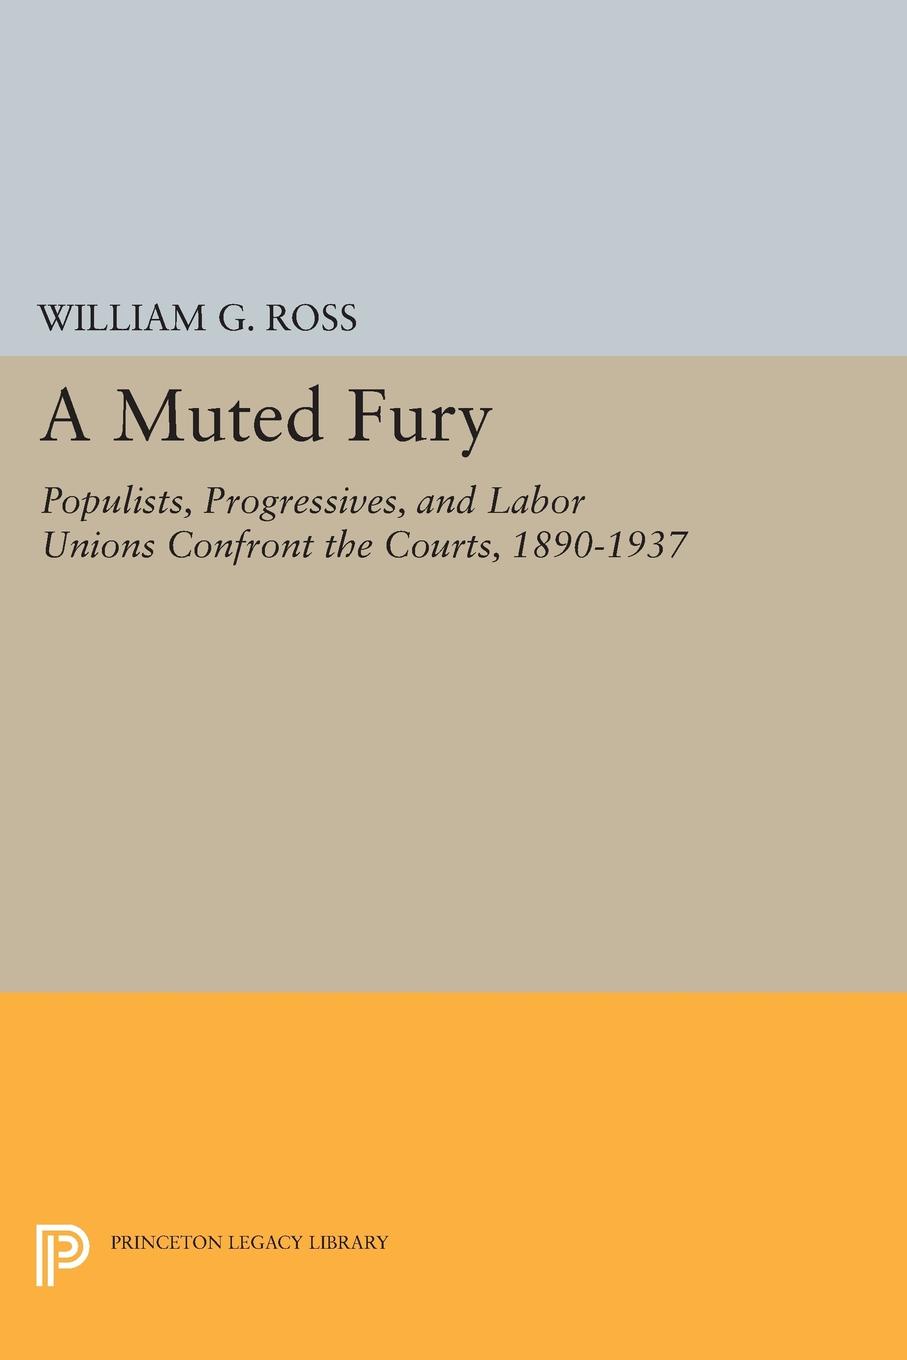 A Muted Fury. Populists, Progressives, and Labor Unions Confront the Courts, 1890-1937